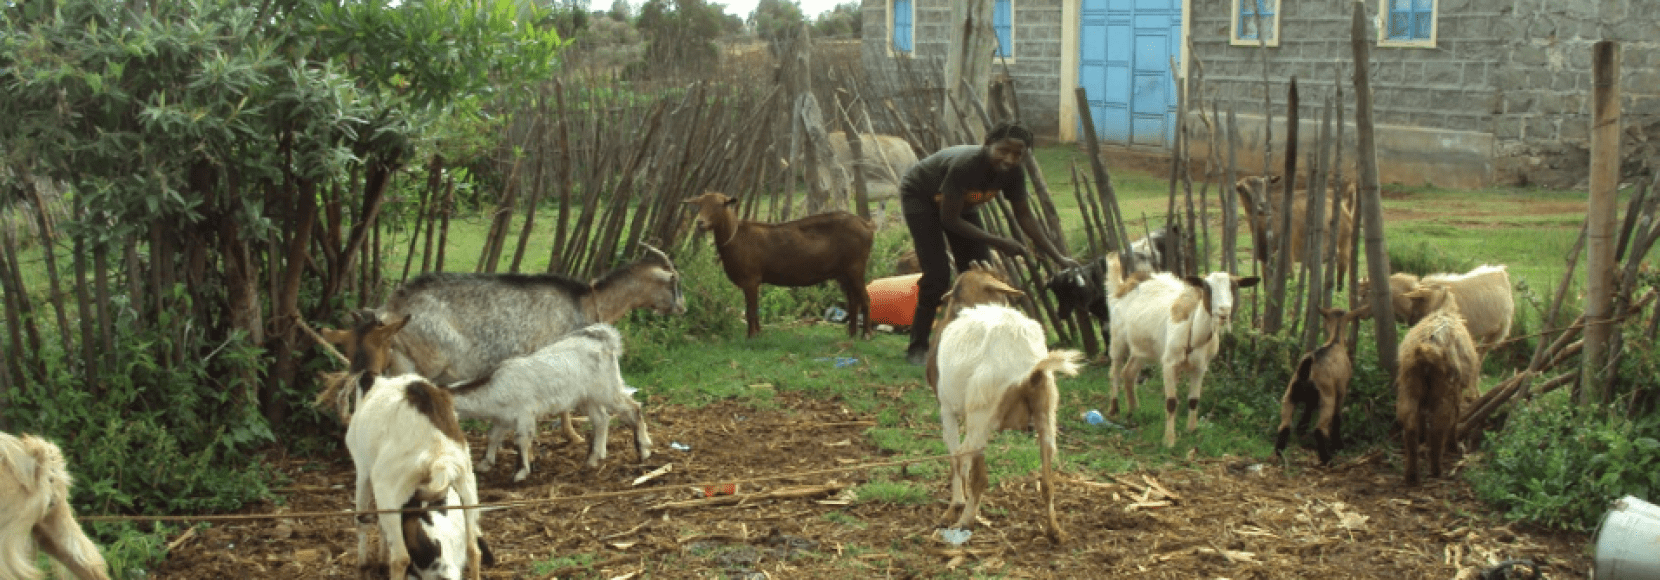 Mary tends to her goats on her property in Kenya